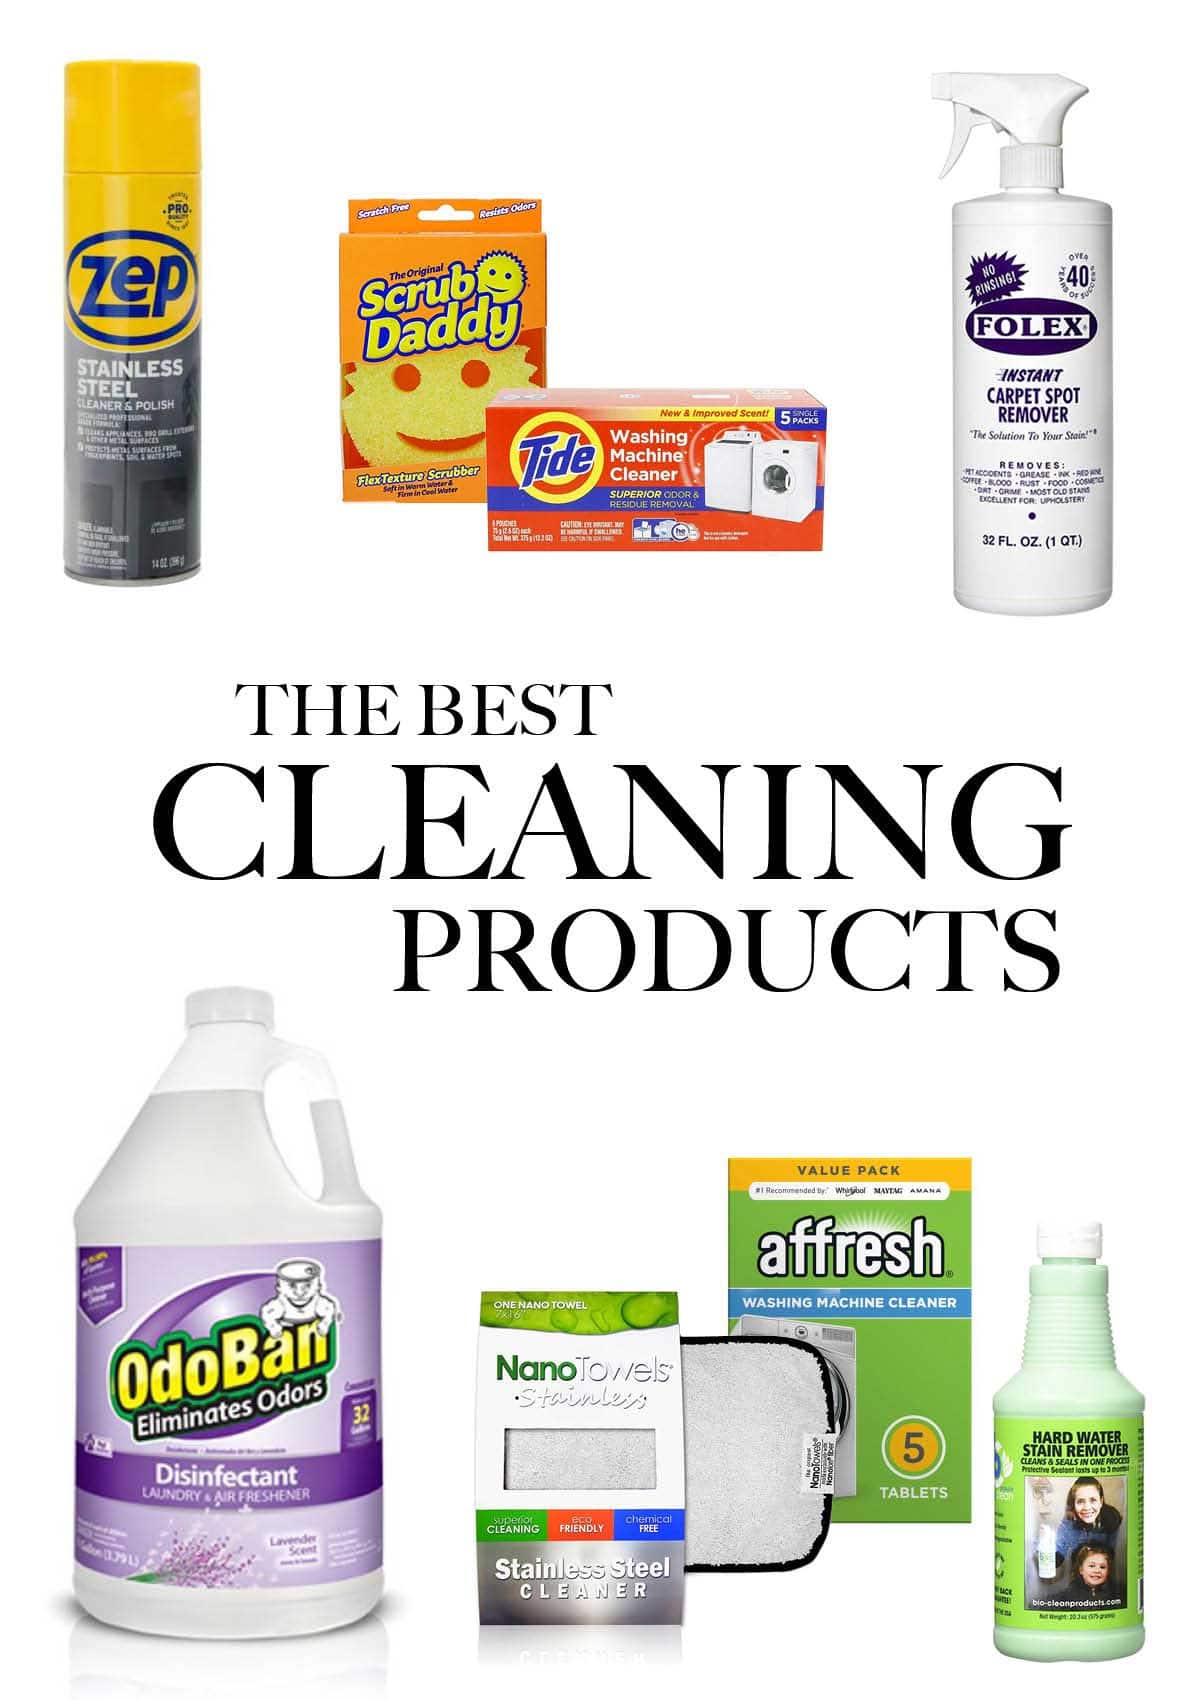 Best Cleaning Products For The Home or Office